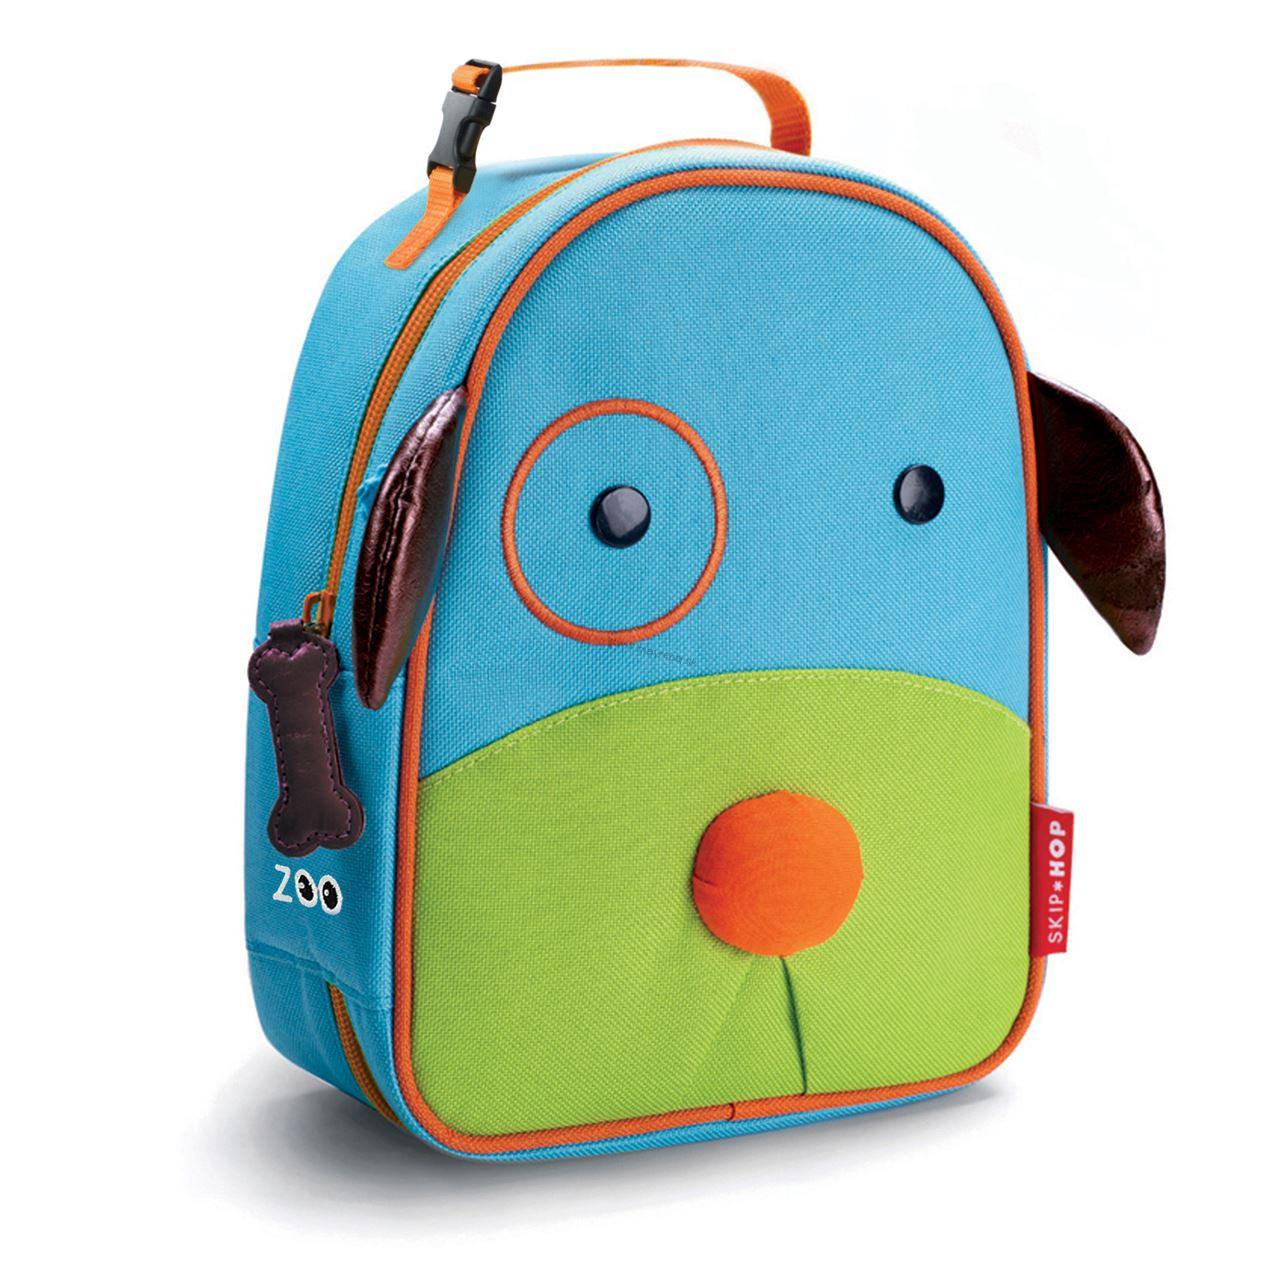 Skip Hop Zoo lunchie Sac-repas isotherme-Girafe Kids Lunch Bags Entièrement neuf sous emballage 